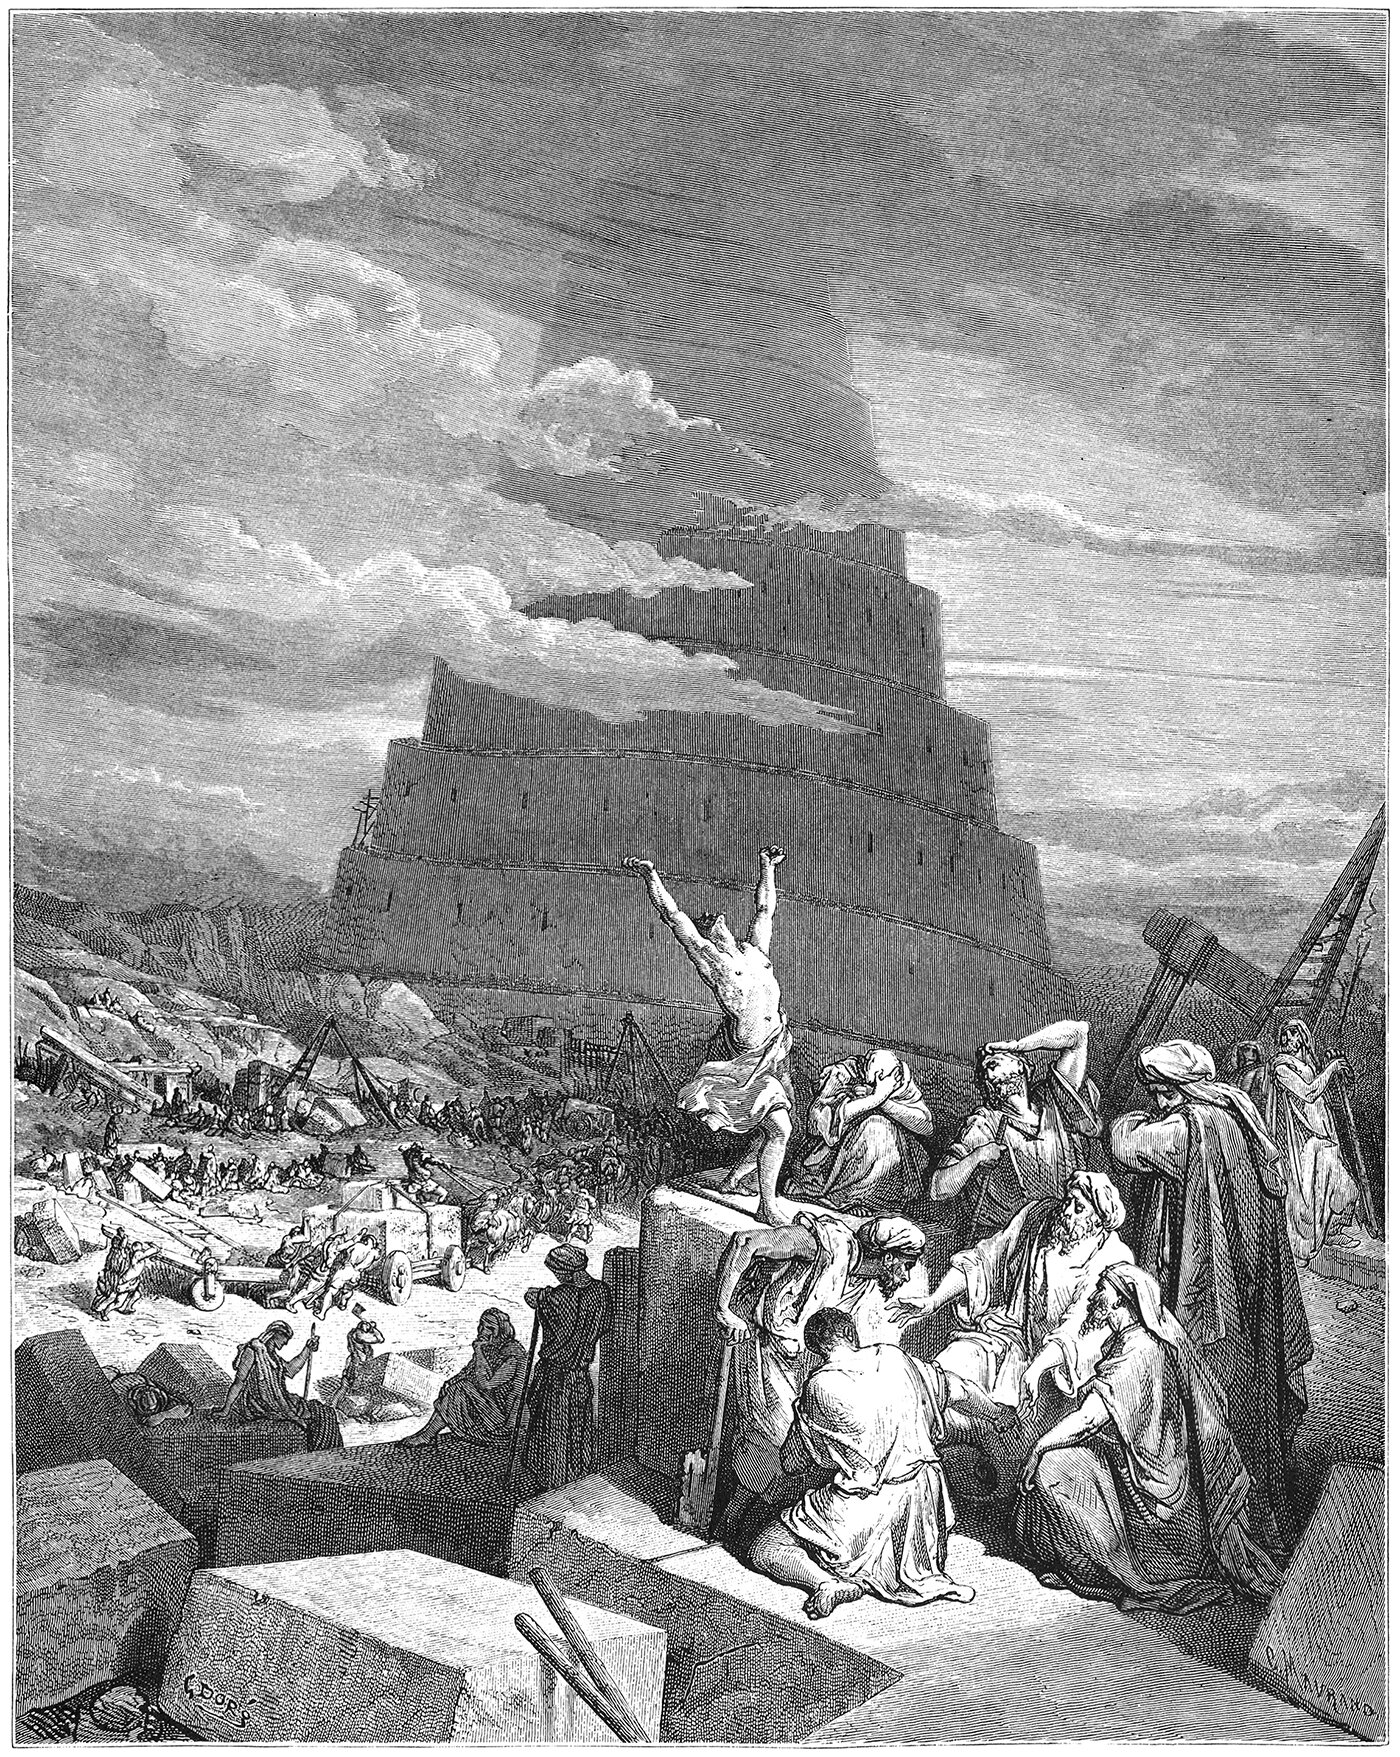 1866 engraving by Gustave Doré, titled The Confusion of Tongues showing the Tower of Babel in the background. This illustration was part of a series of engravings for the Bible, and Doré’s version for the tower is a simple, solid form with a spirali…